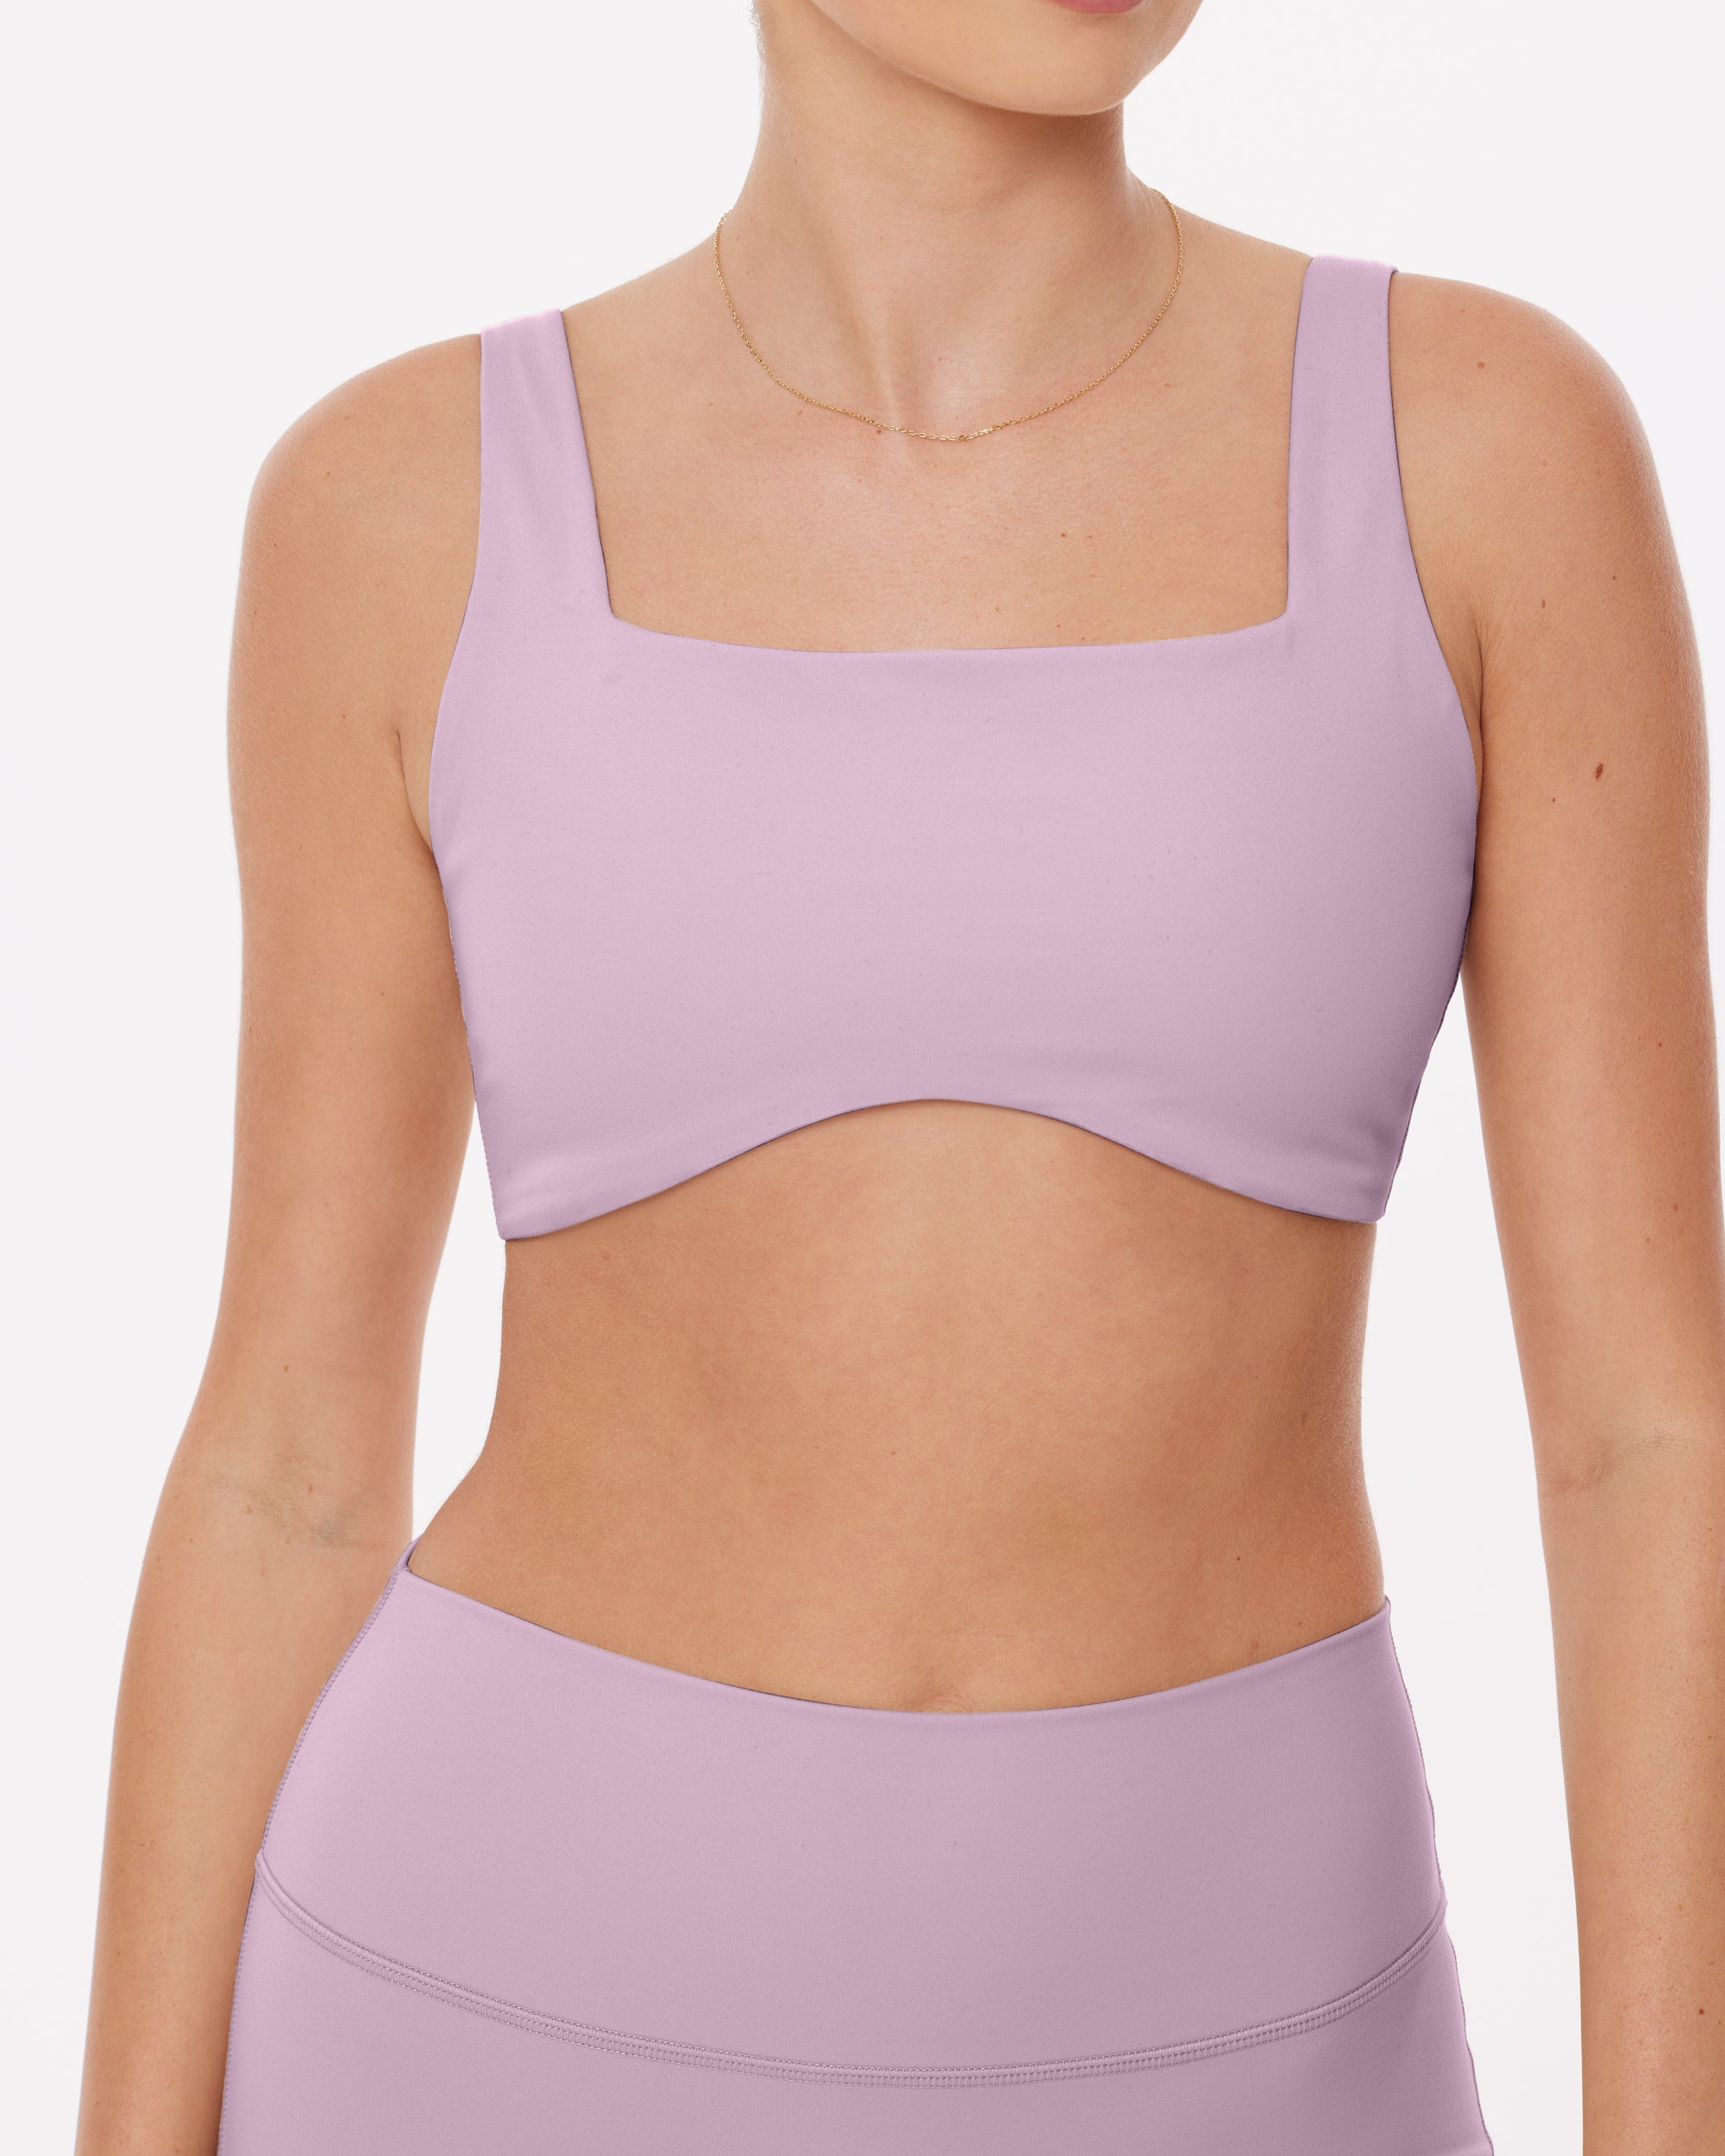 Is That The New Medium Support Scoop Neck Sports Bra ??